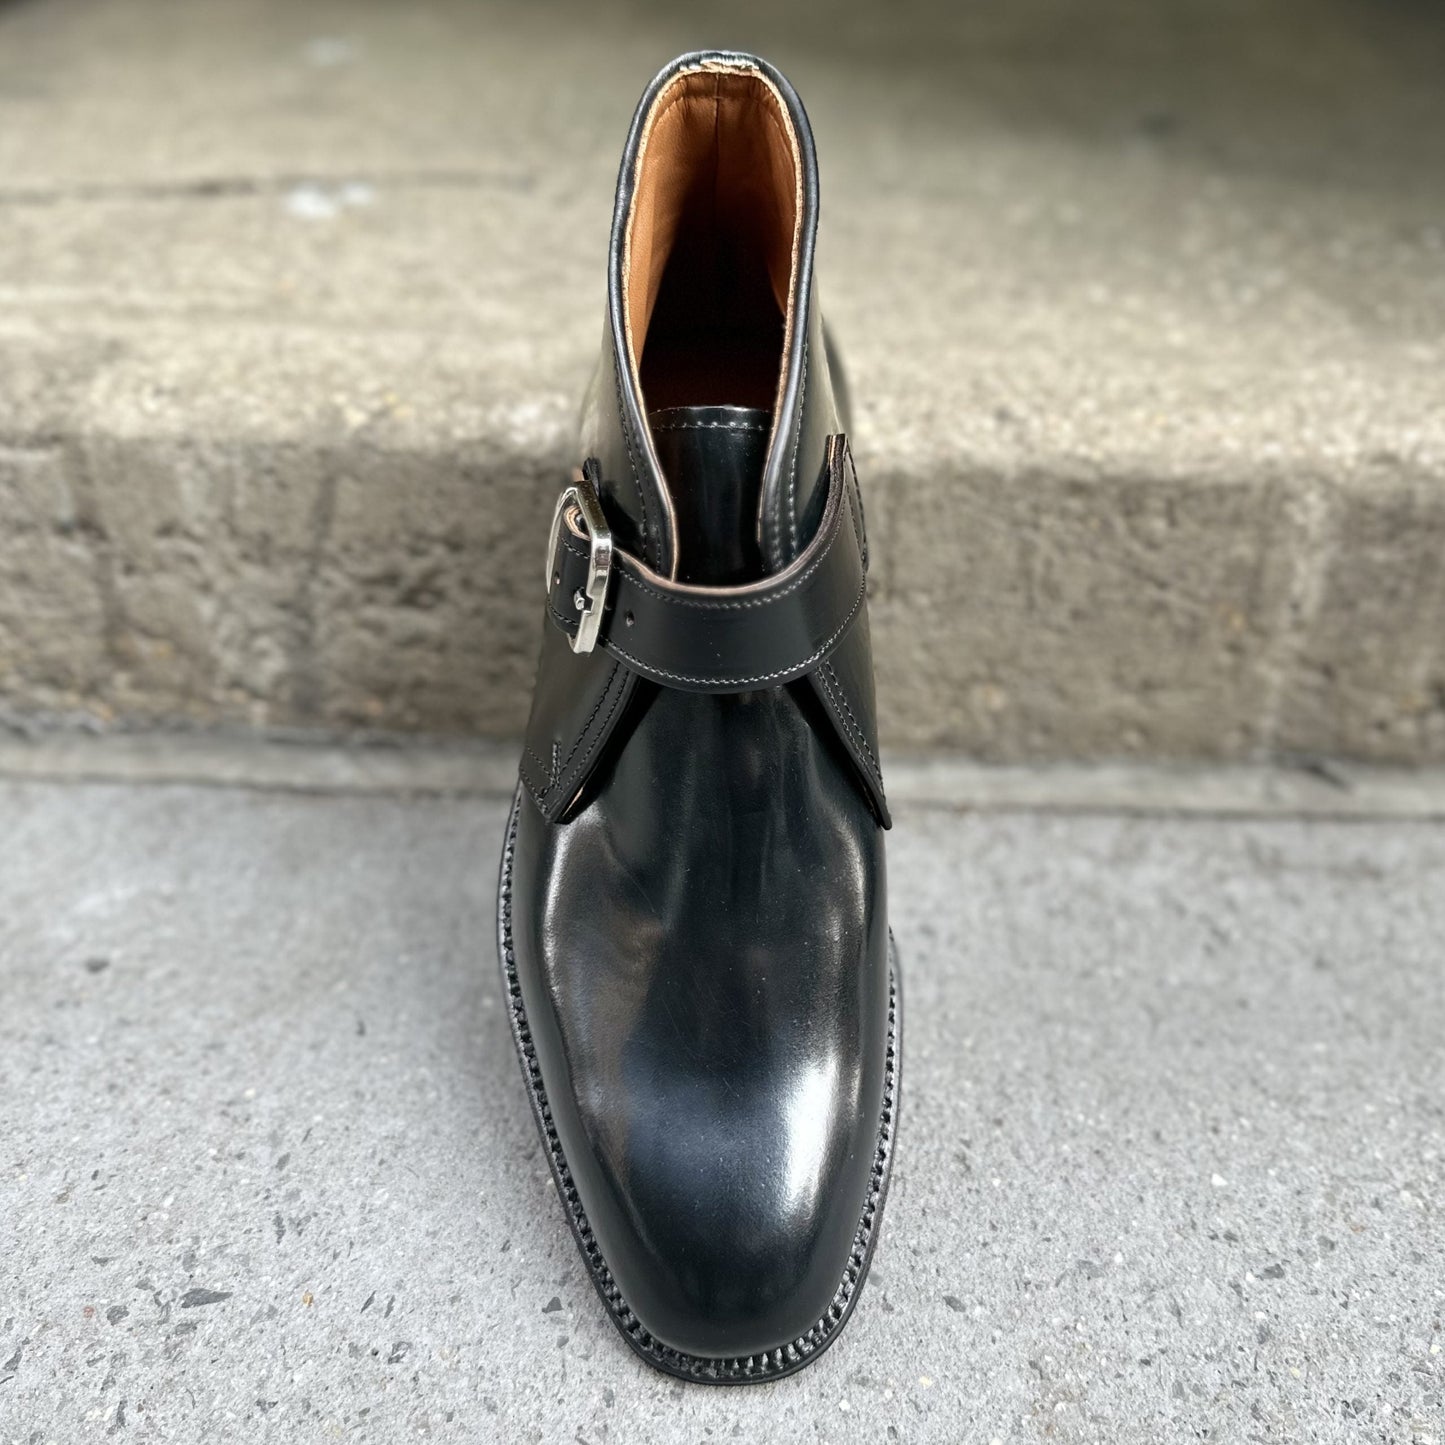 D2712 - George Boot in Black Shell Cordovan